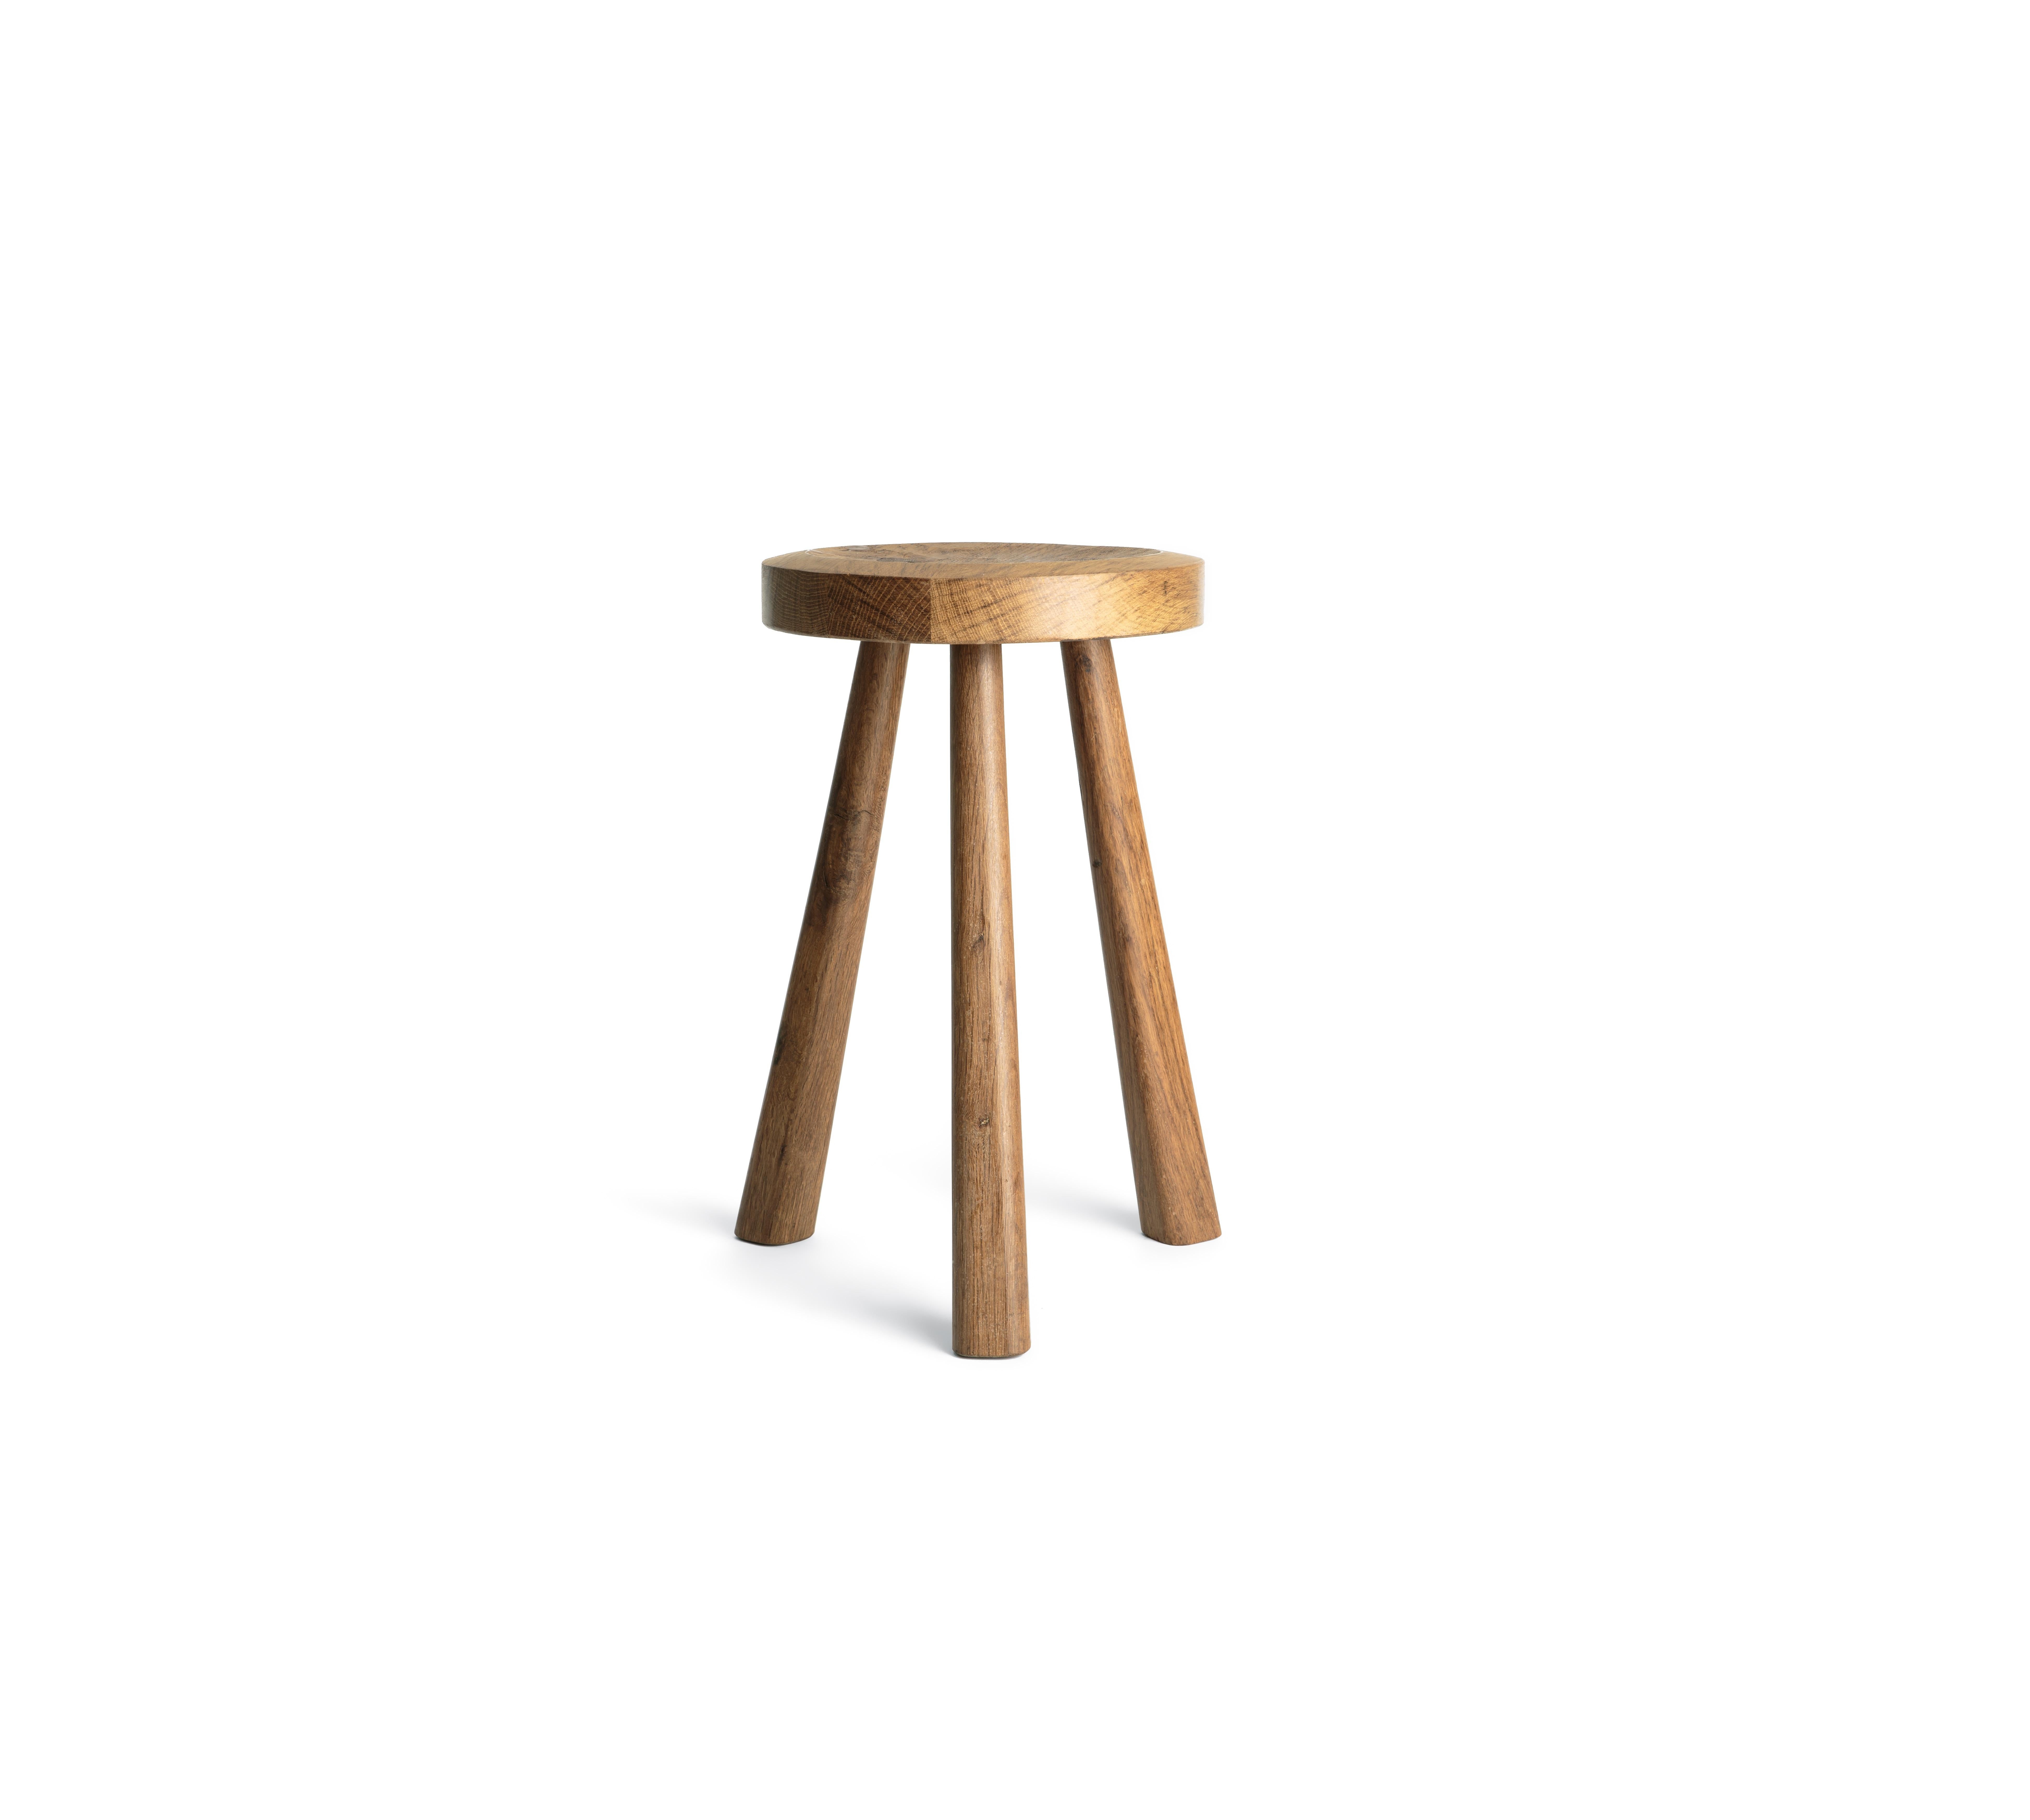 French Single Wooden Stool by Jean Touret and the Artisans of Marolles